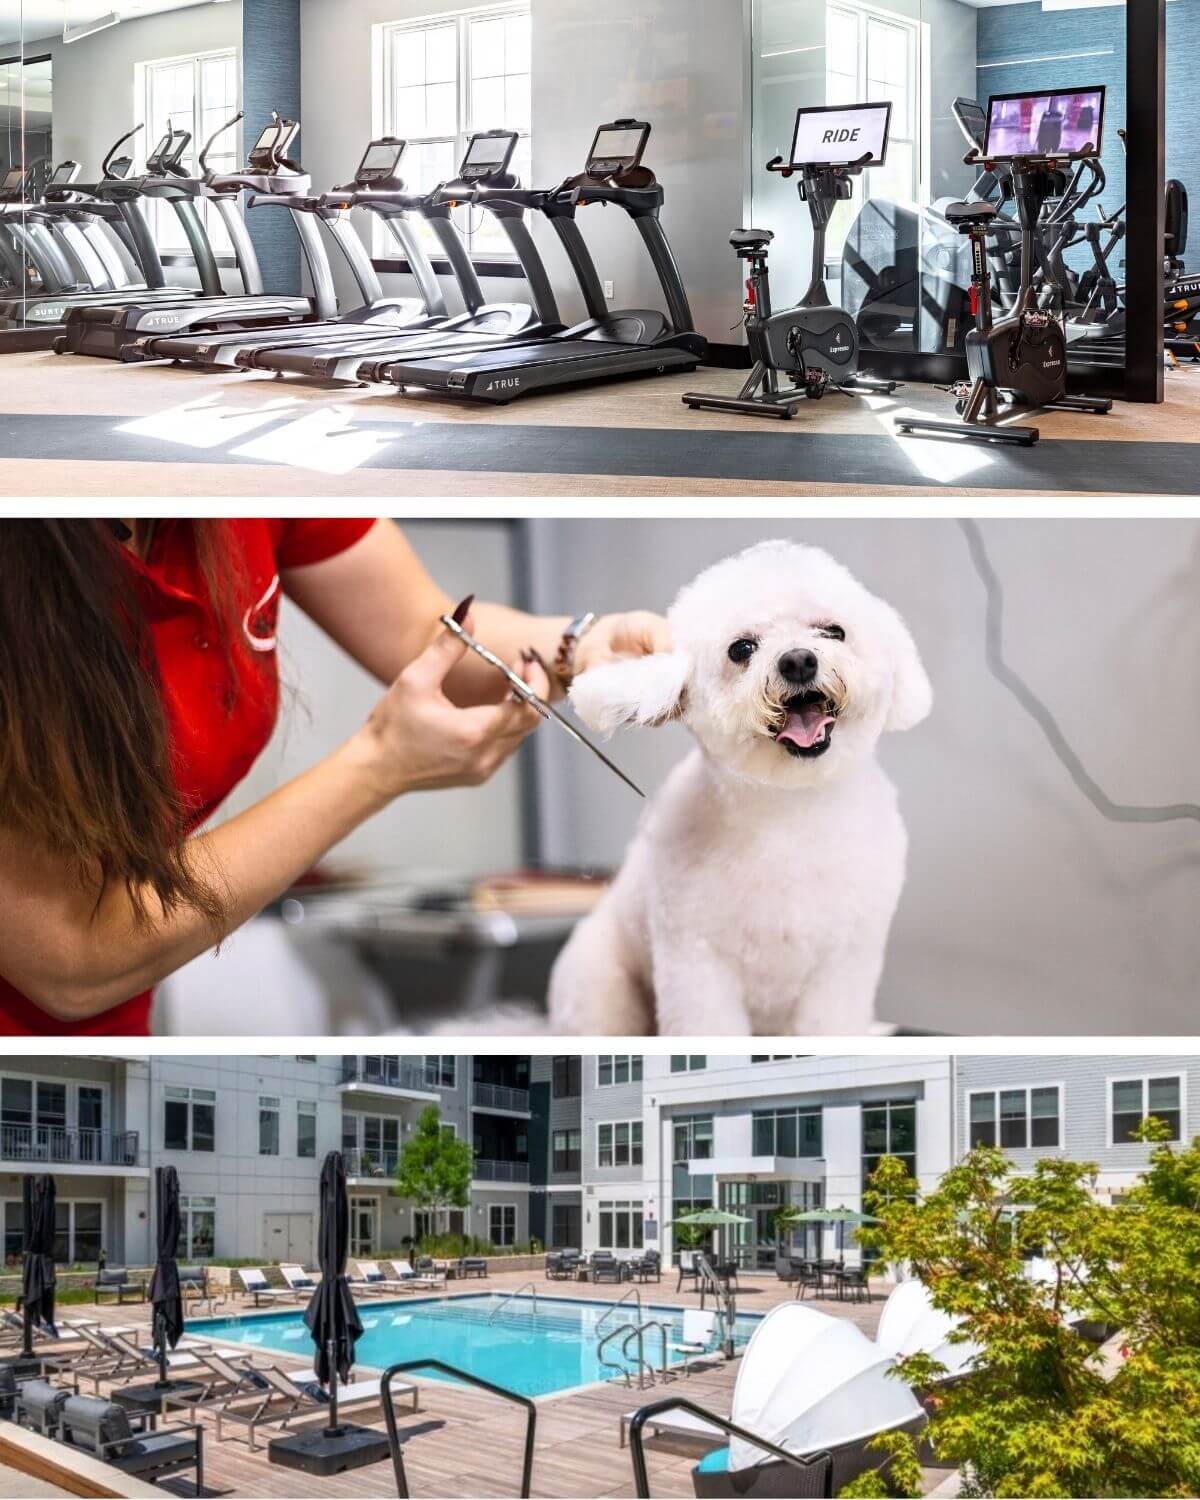 Gym equipment, small dog getting groomed and swimming pool